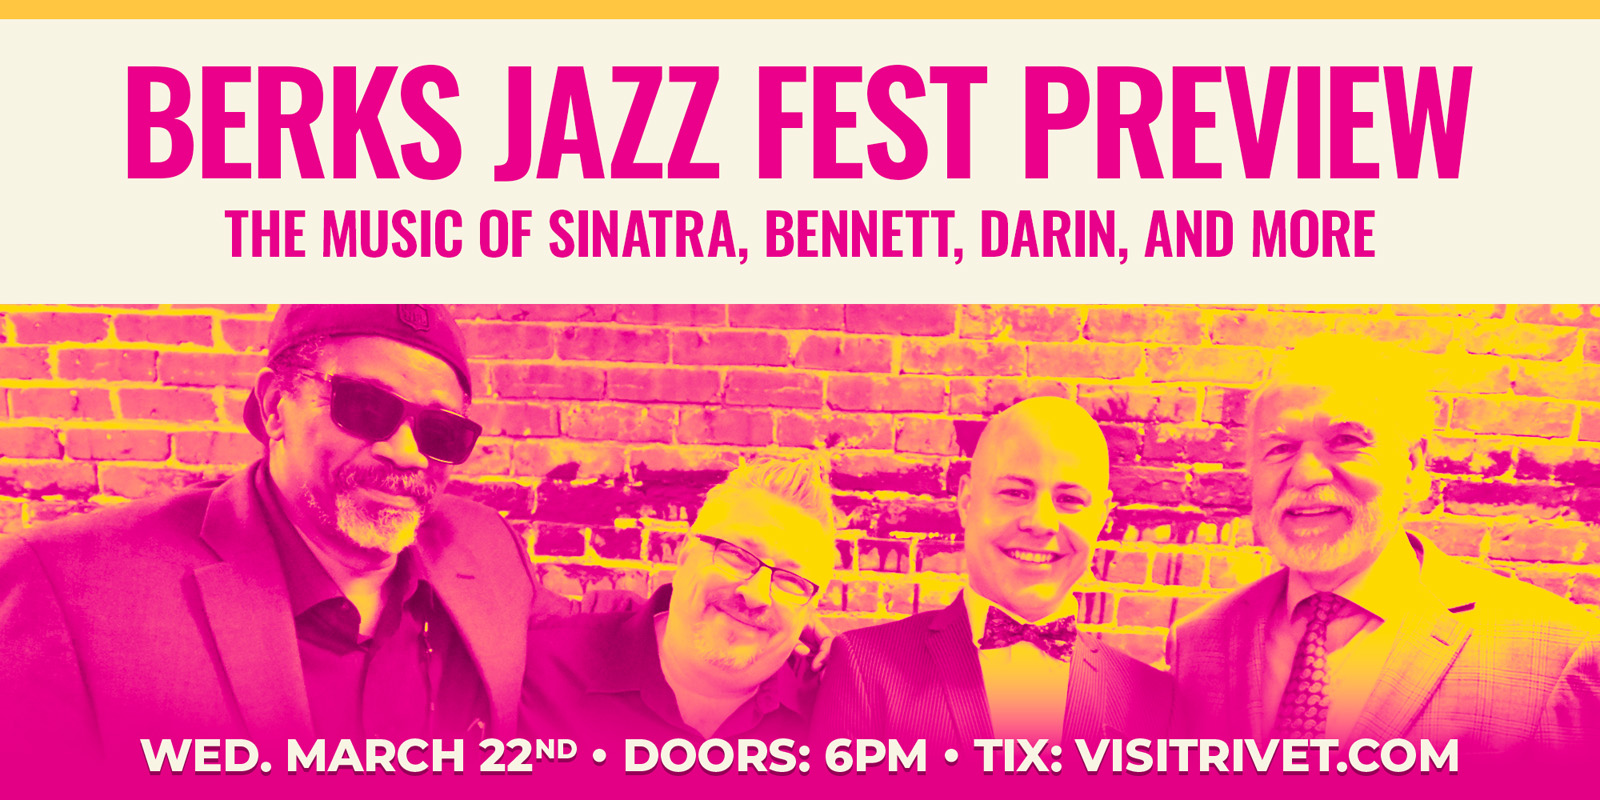 Berks Jazz Fest Preview: The Music of Sinatra, Bennett, Darin, and more at Rivet: Canteen & Assembly on Wednesday, March 22nd!